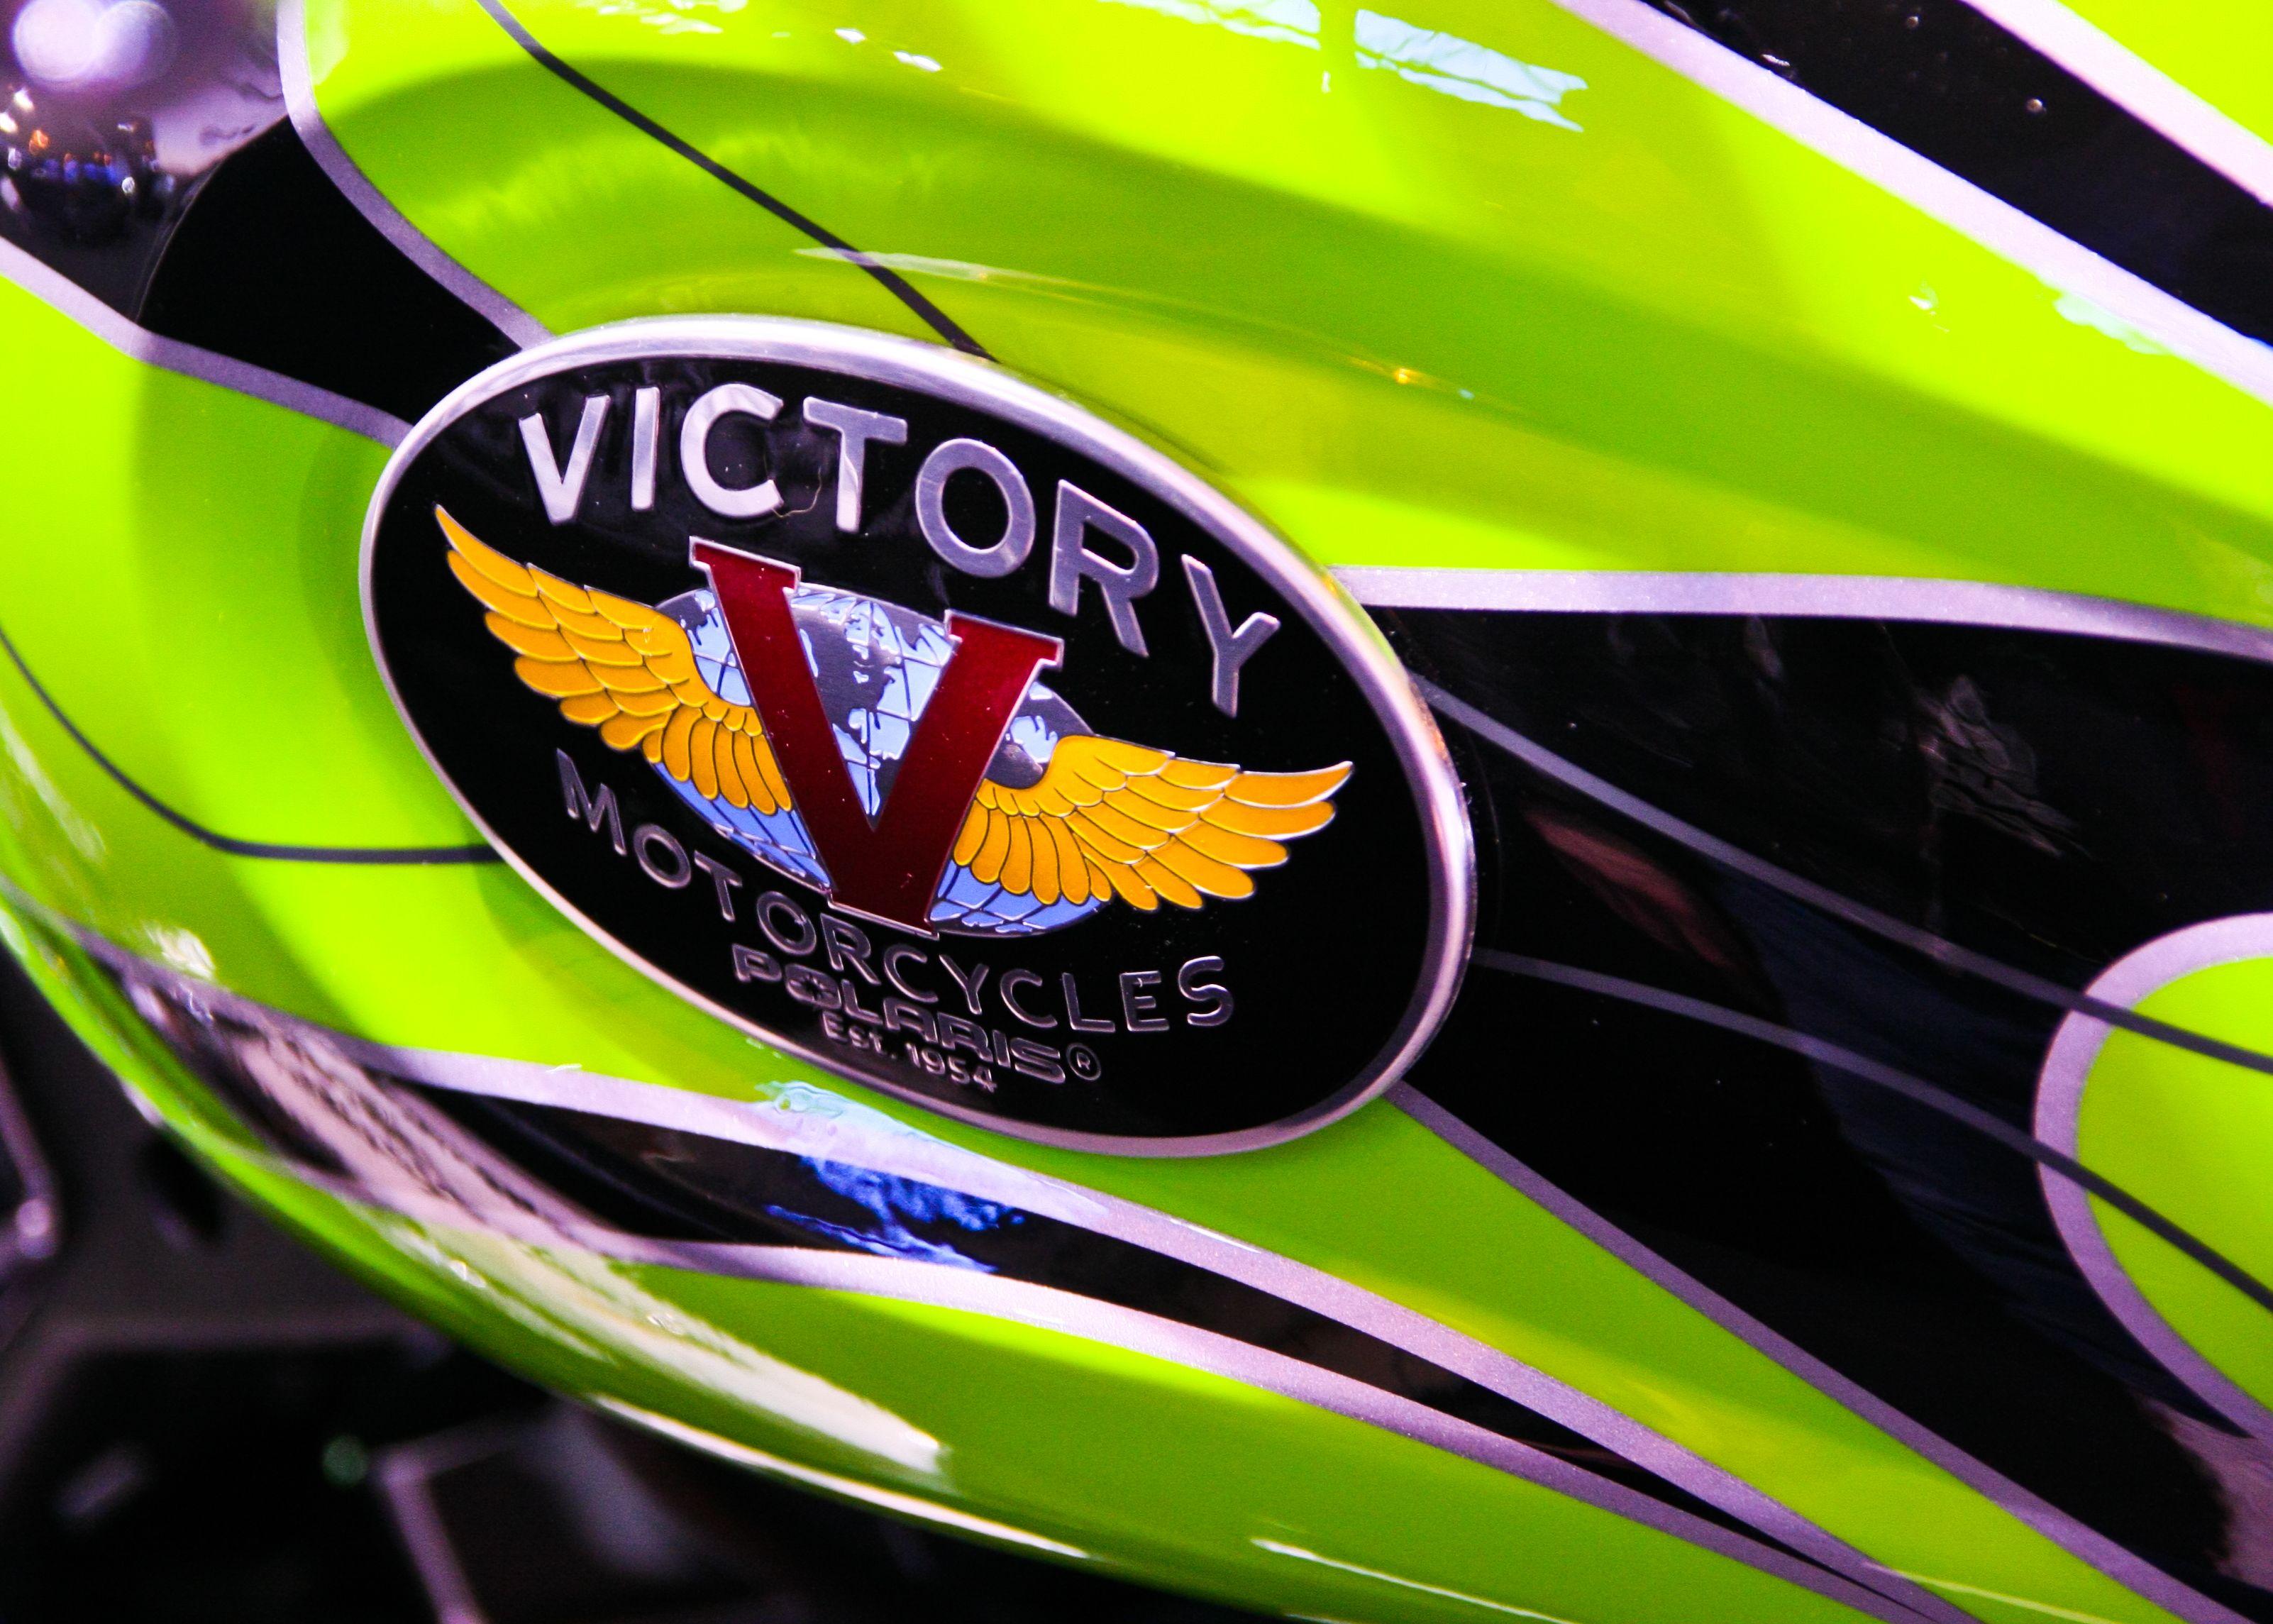 Victory Motorcycle Logo - File:Victory motorcycles logo (4158605284).jpg - Wikimedia Commons